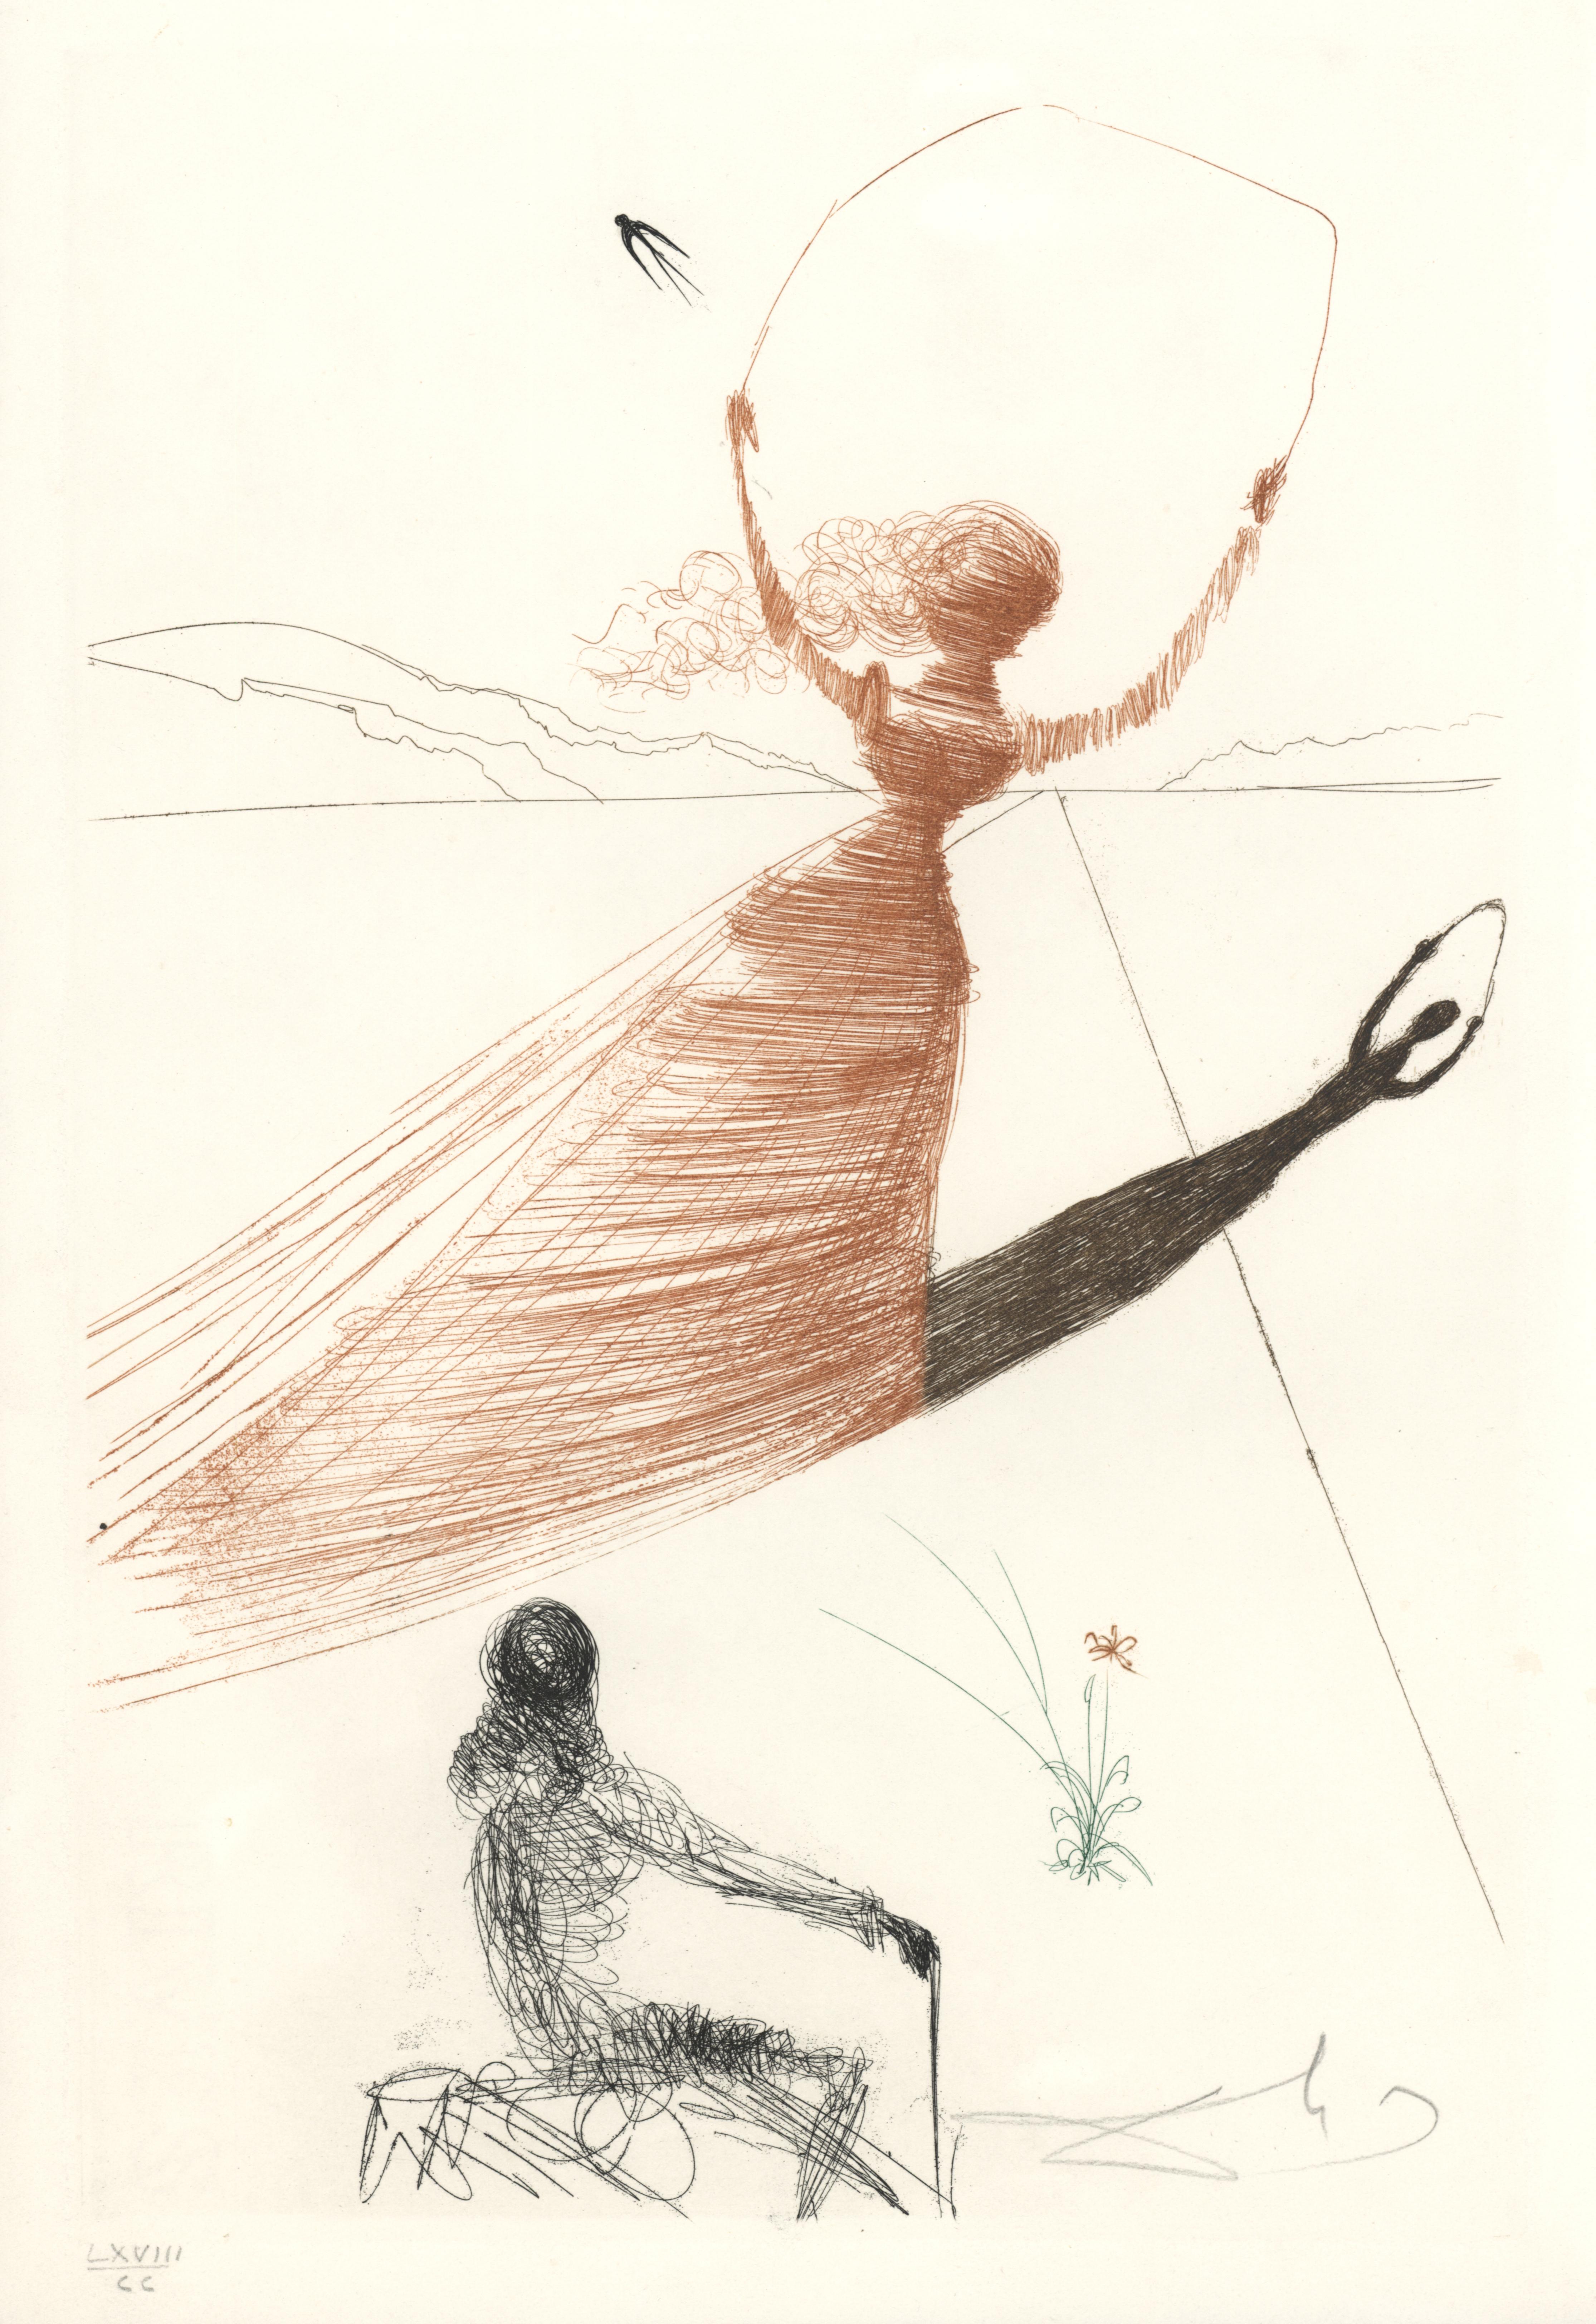 Frontis Piece to Alice’s Adventures in Wonderland by Dali, Edition of 200 - Print by Salvador Dalí